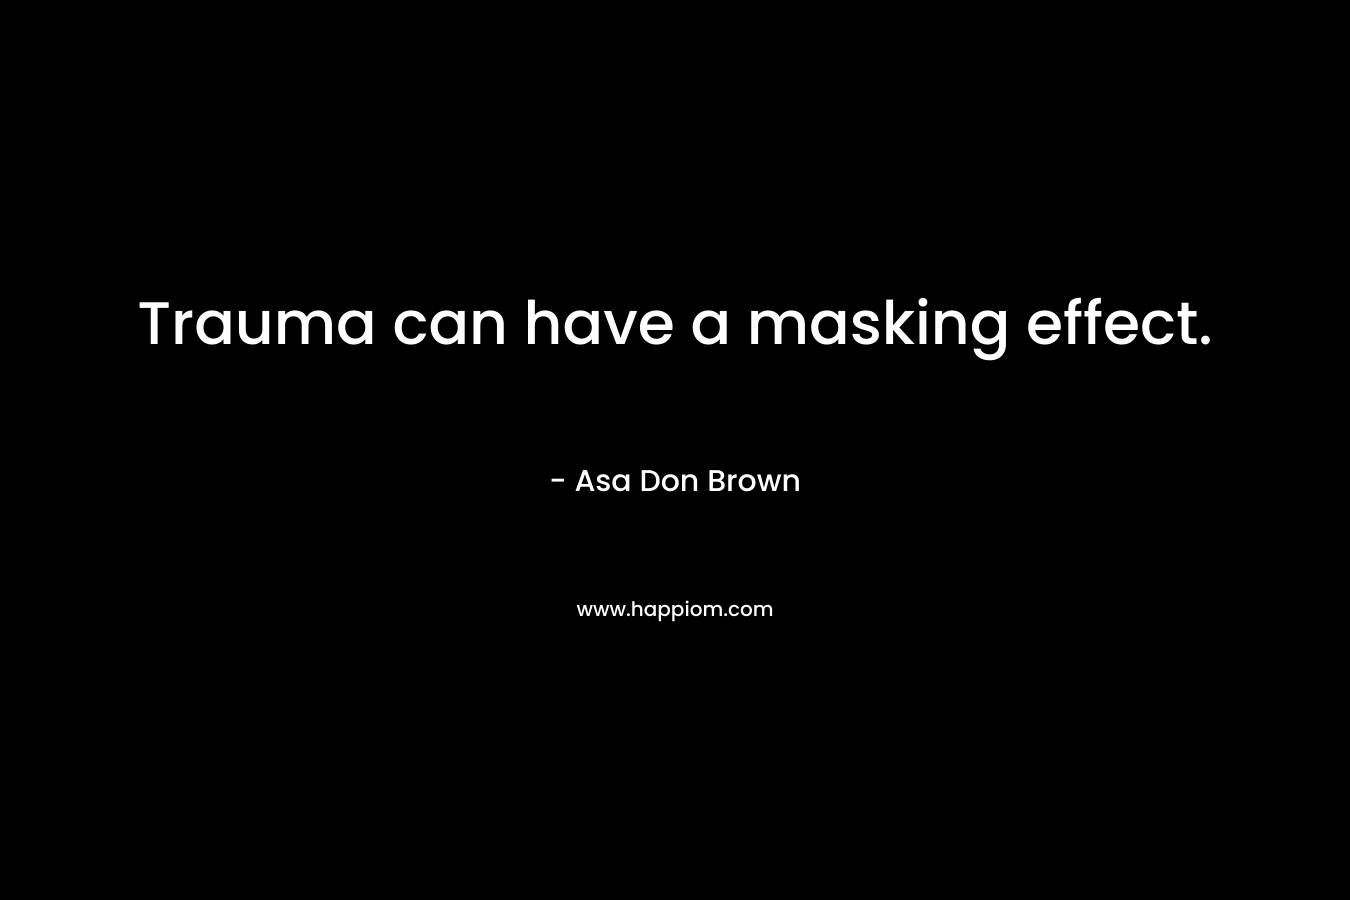 Trauma can have a masking effect.